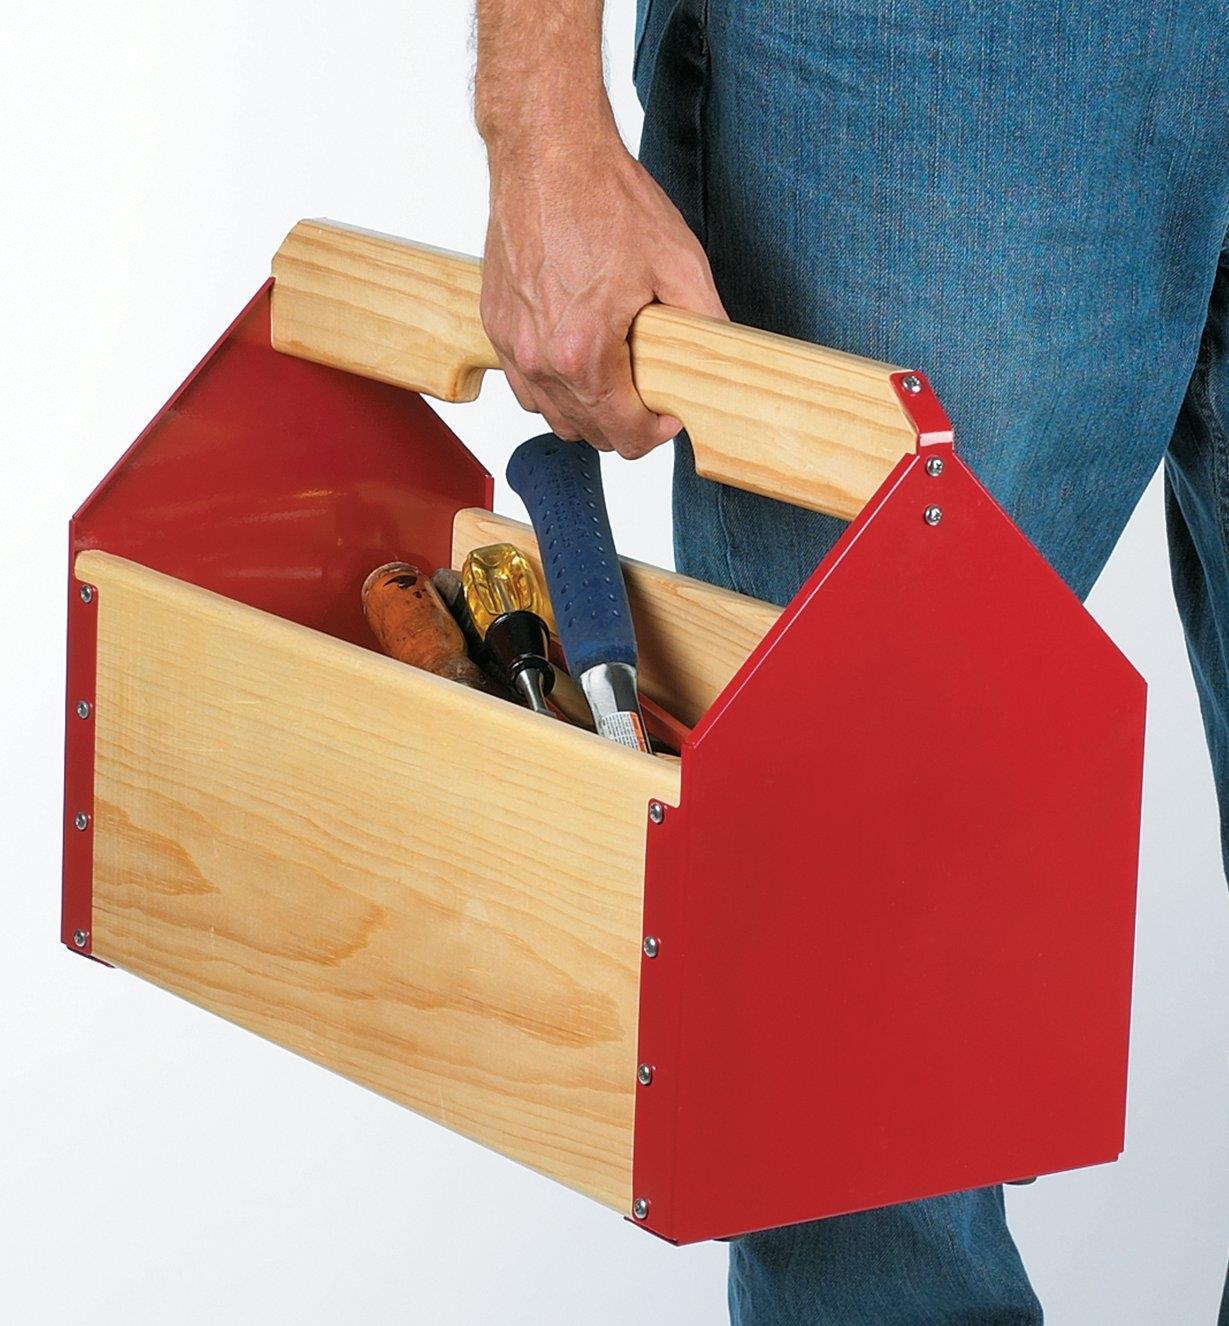 A man carries a toolbox made with toolbox ends filled with tools